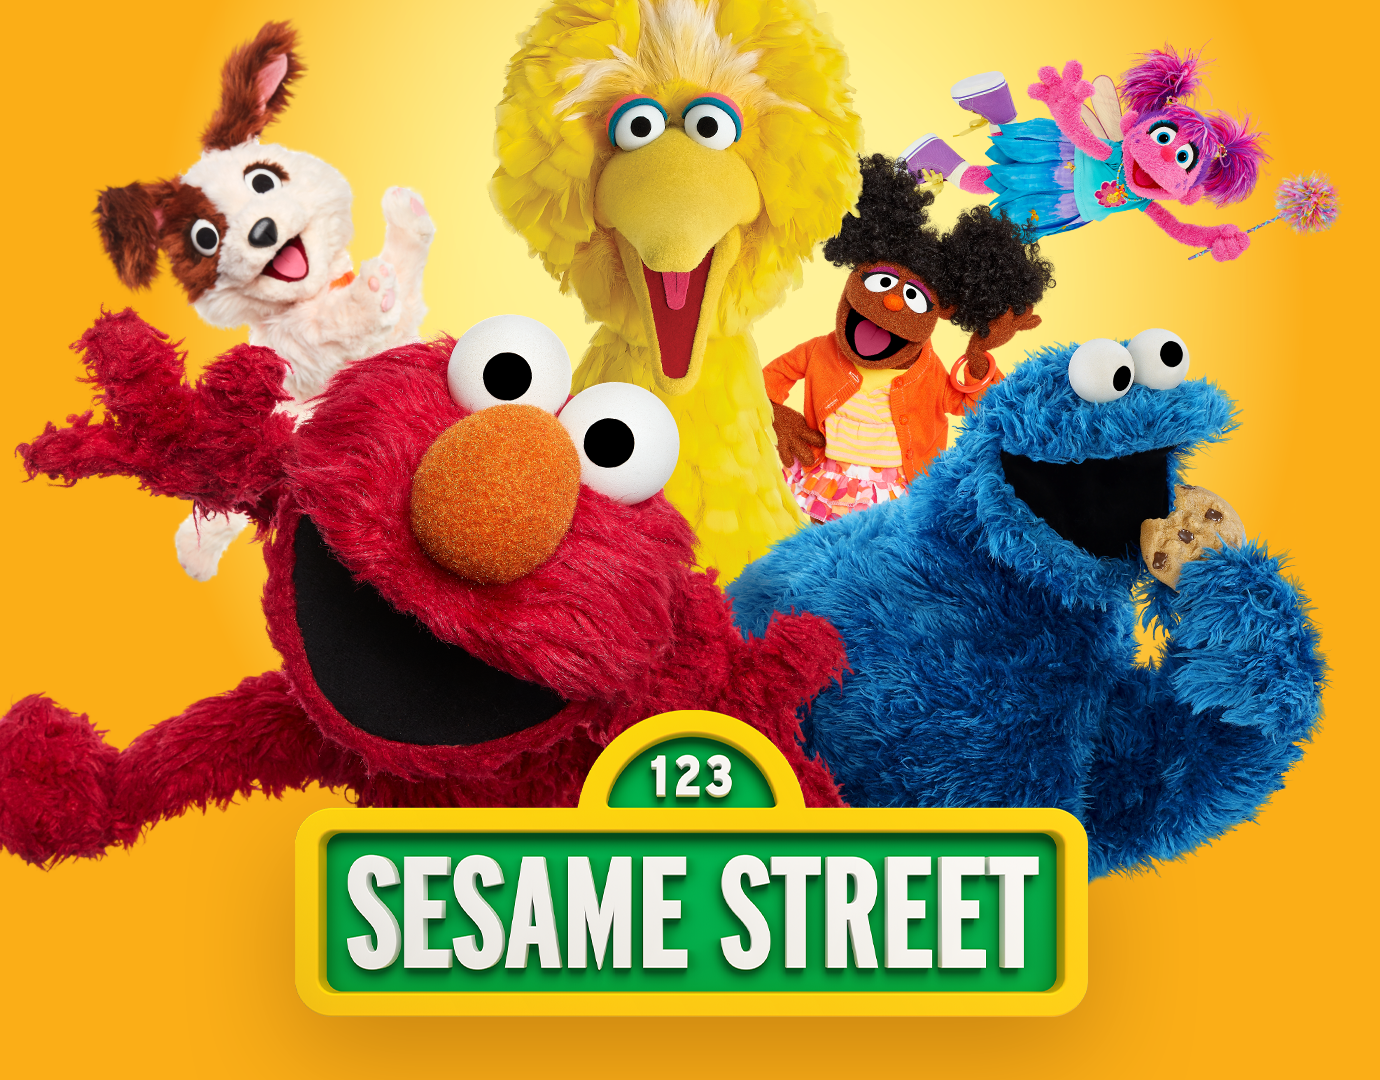 Learn Along with Sesame Season 1 Digital Download for Free on